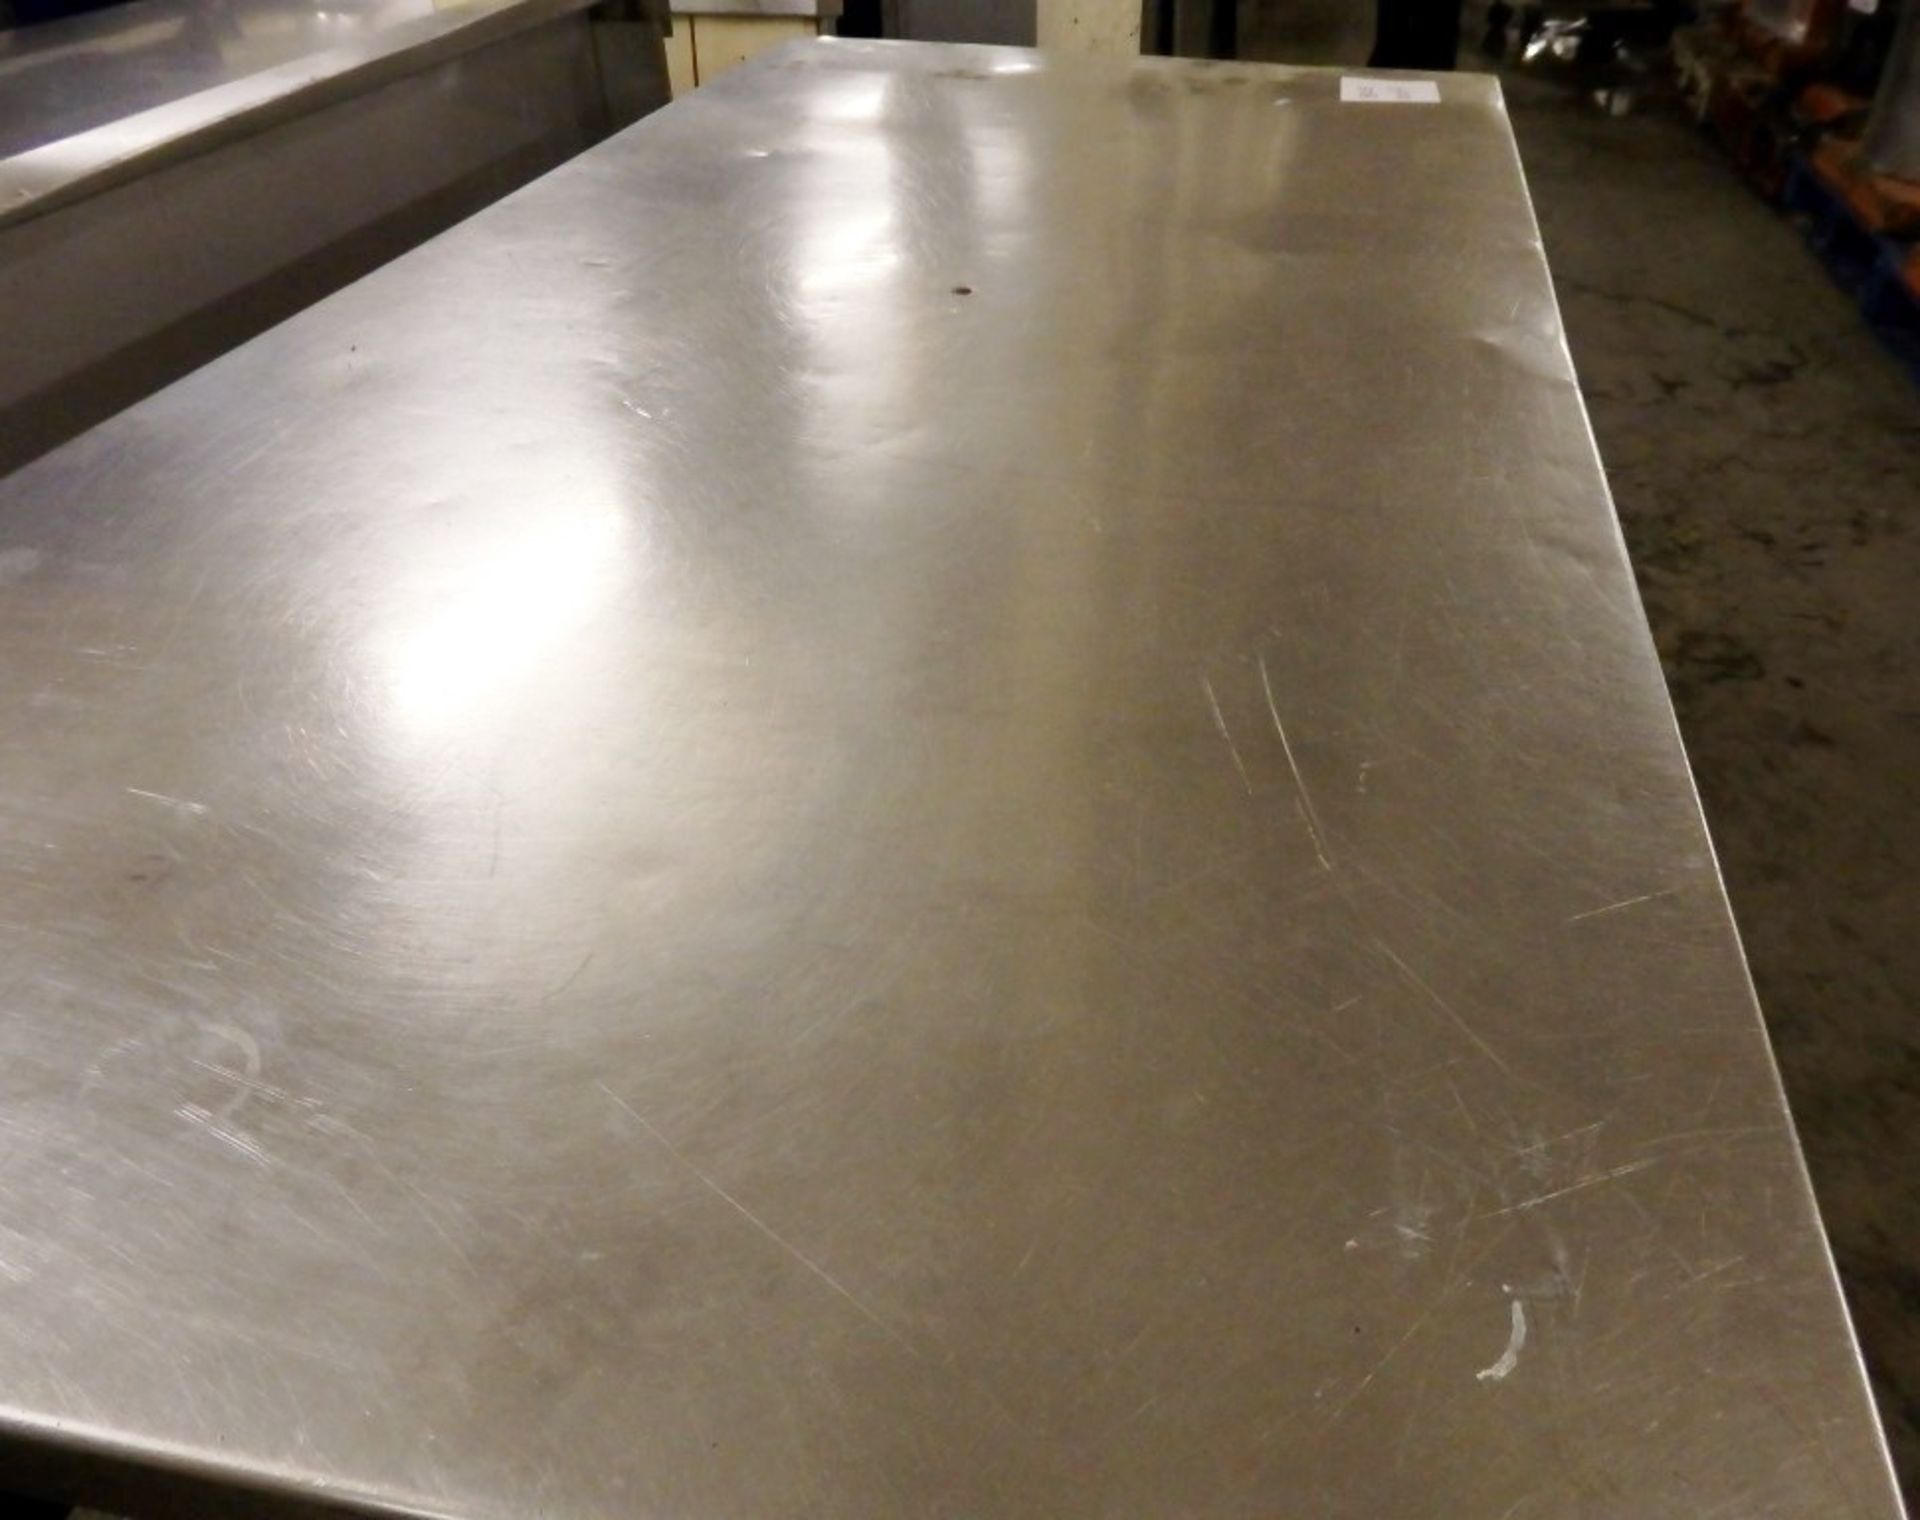 1 x Stainless Steel Commercial Catering Preparation Table - Dimensions: W176 x D84 x H89cm - Ref: - Image 2 of 6